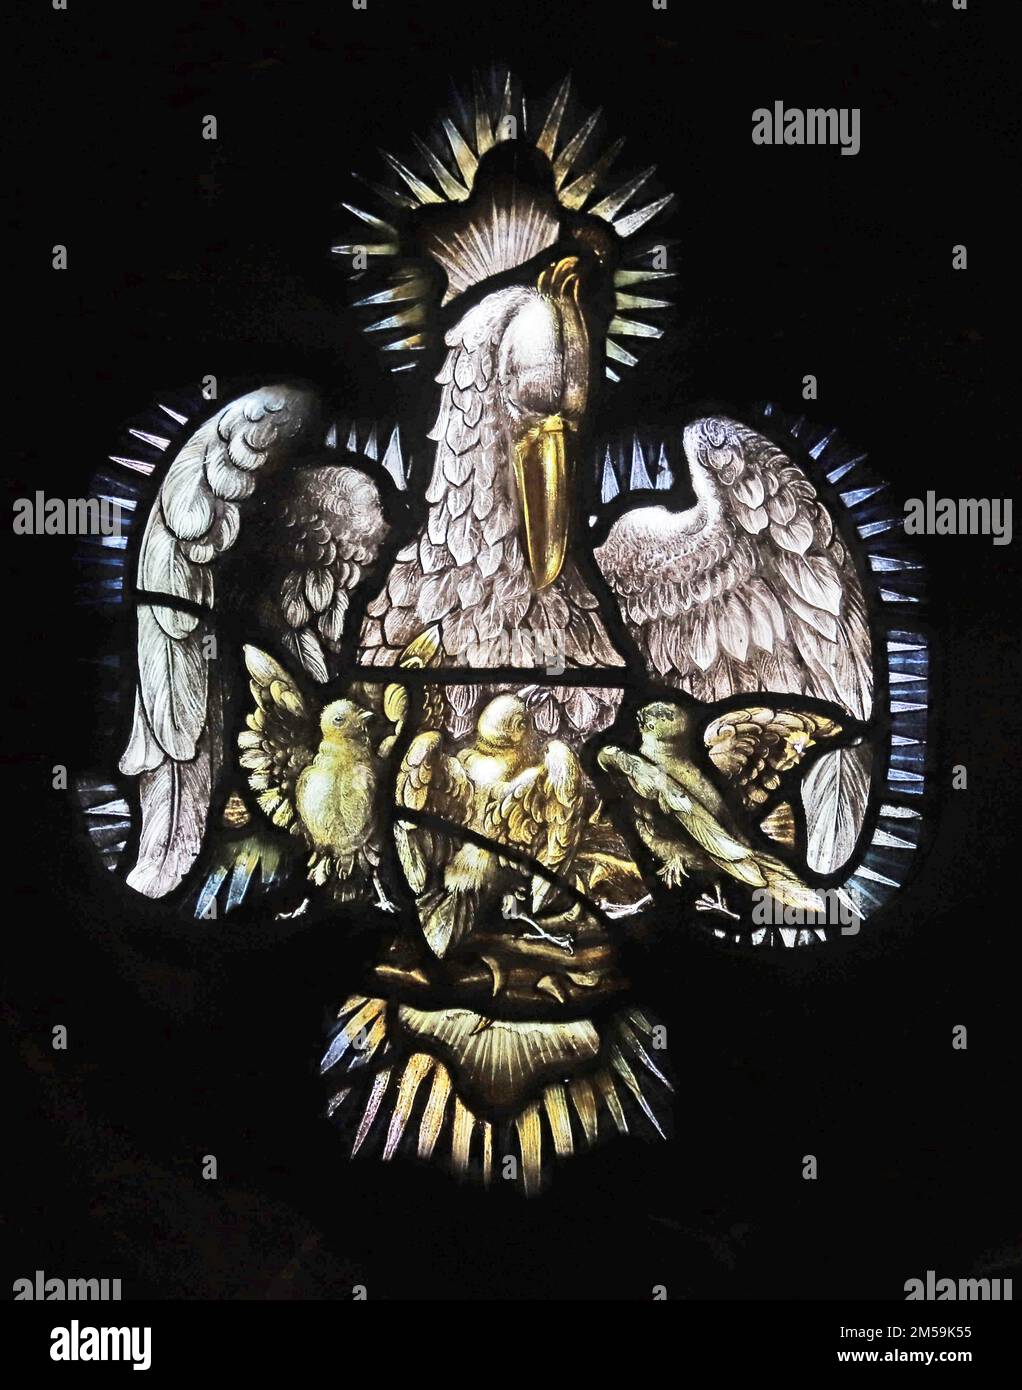 Stained glass window by Percy Bacon & Brothers depicting The Pelican in its Piety, St Chard's Church, Bensham, Gateshead Stock Photo